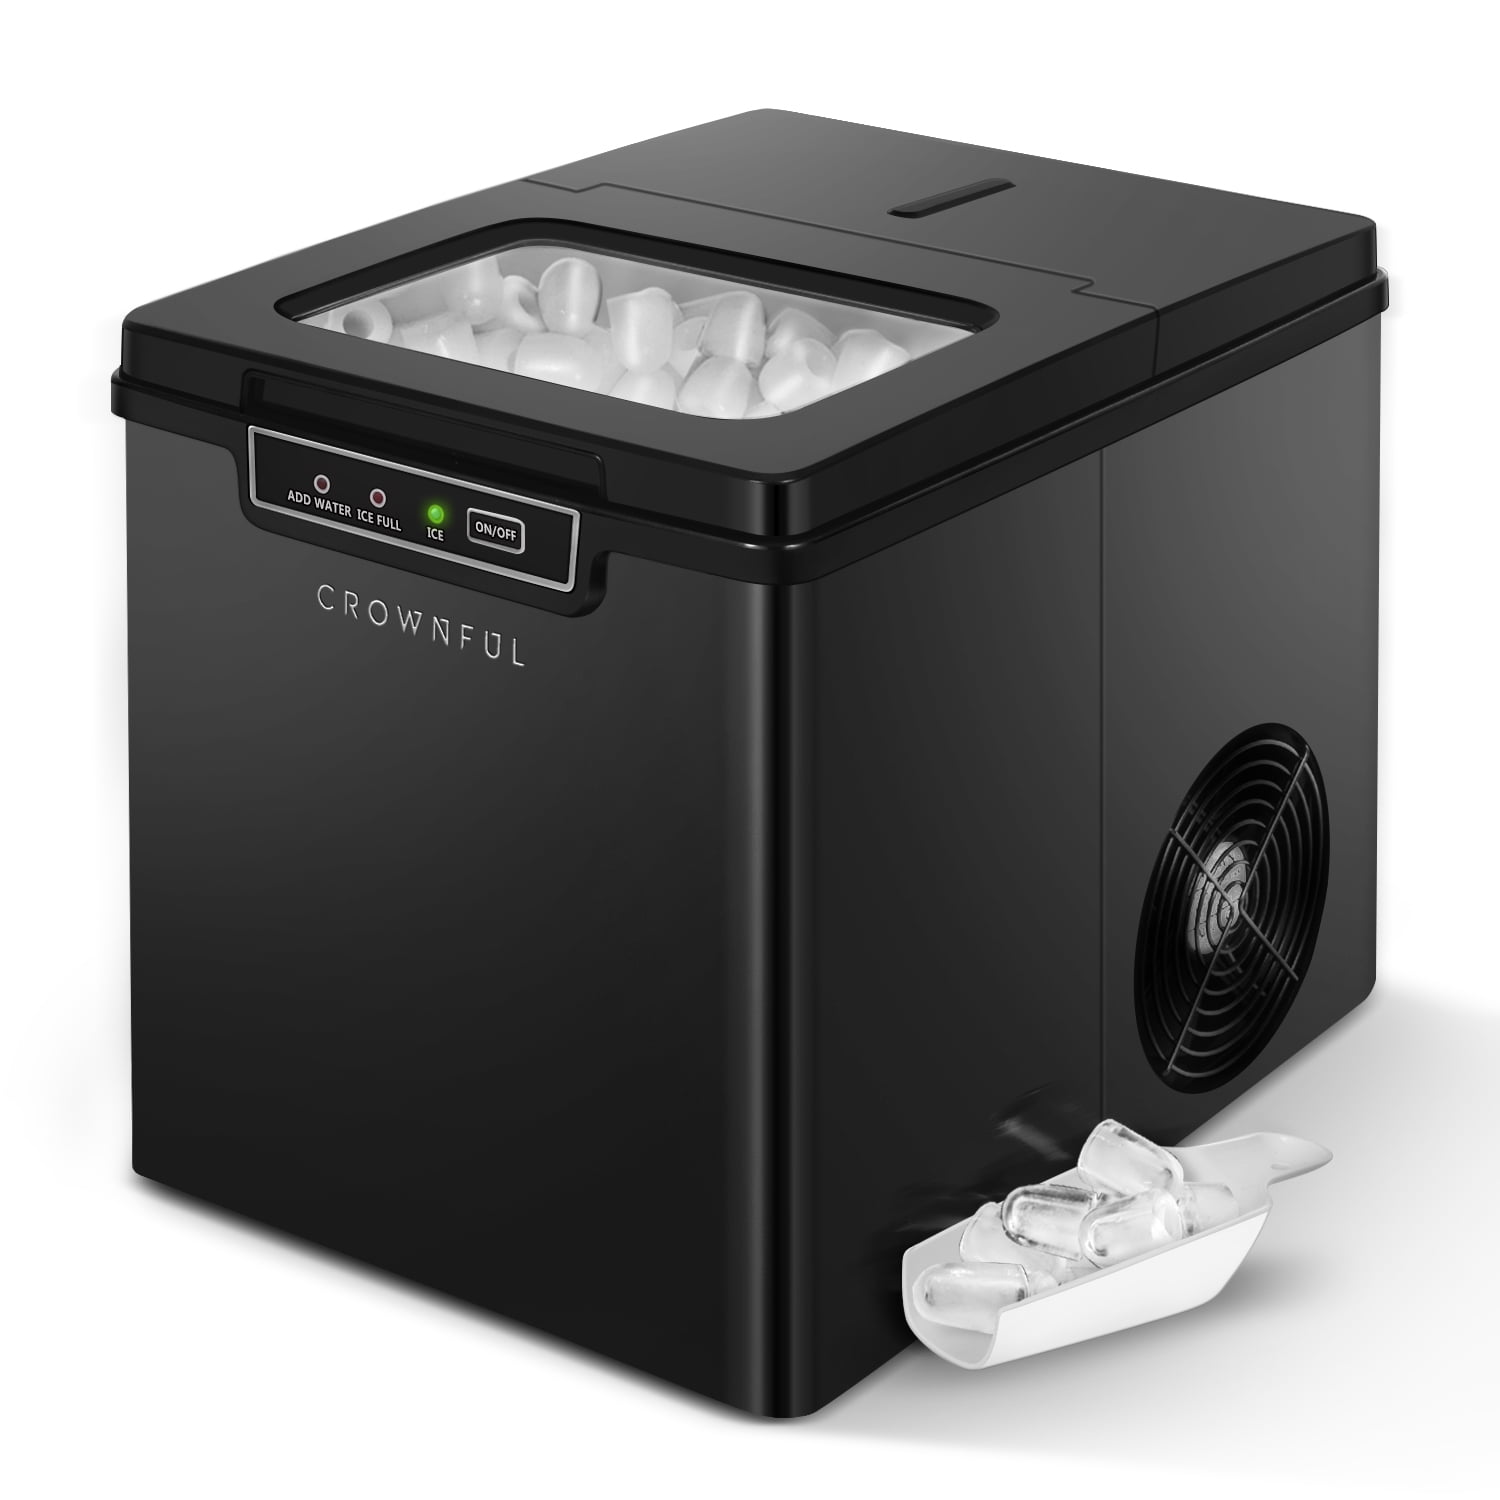 Produces Ice Cubes within approx 7-13 min Compact and Portable Ice Cube Maker Includes Scoop and Removable Basket Ice Maker Machine 2L Tank No Plumbing Required Silber